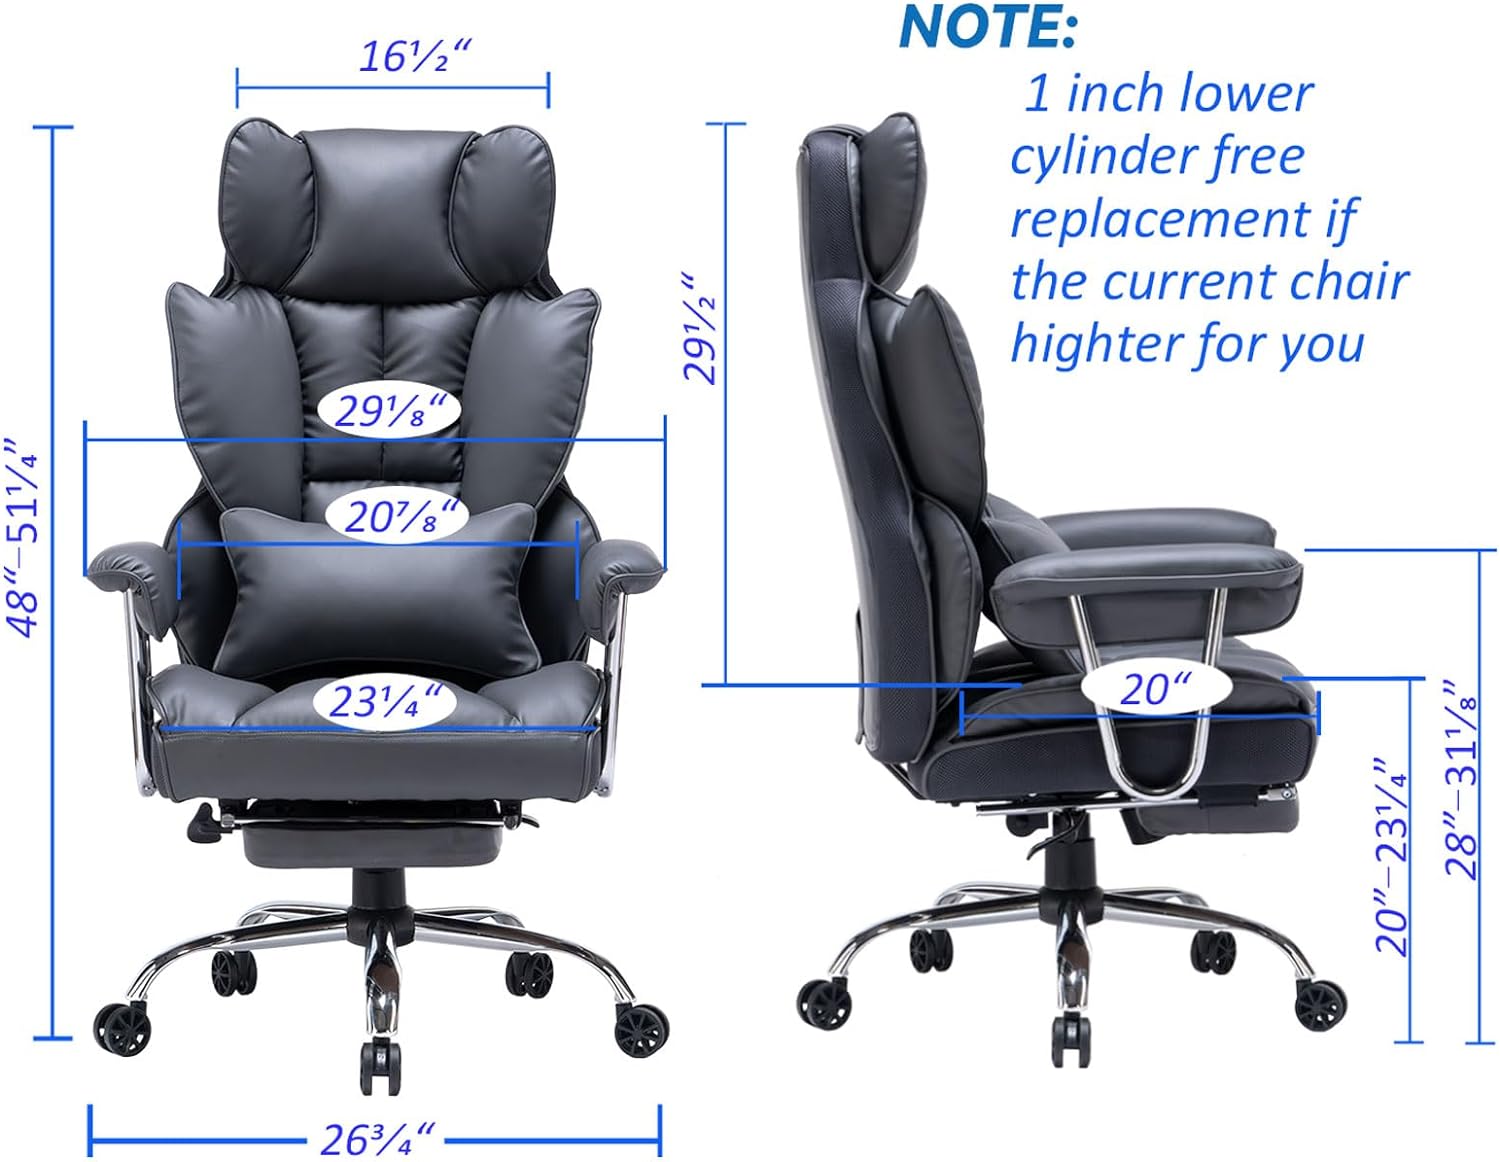 Ergonomic Office Chair, Big and Tall High Back Office Chair, PU Leather Wide Computer Office Chair Executive Office Chair Lumbar Support Leg Rest for Heavy People (Dark Grey)